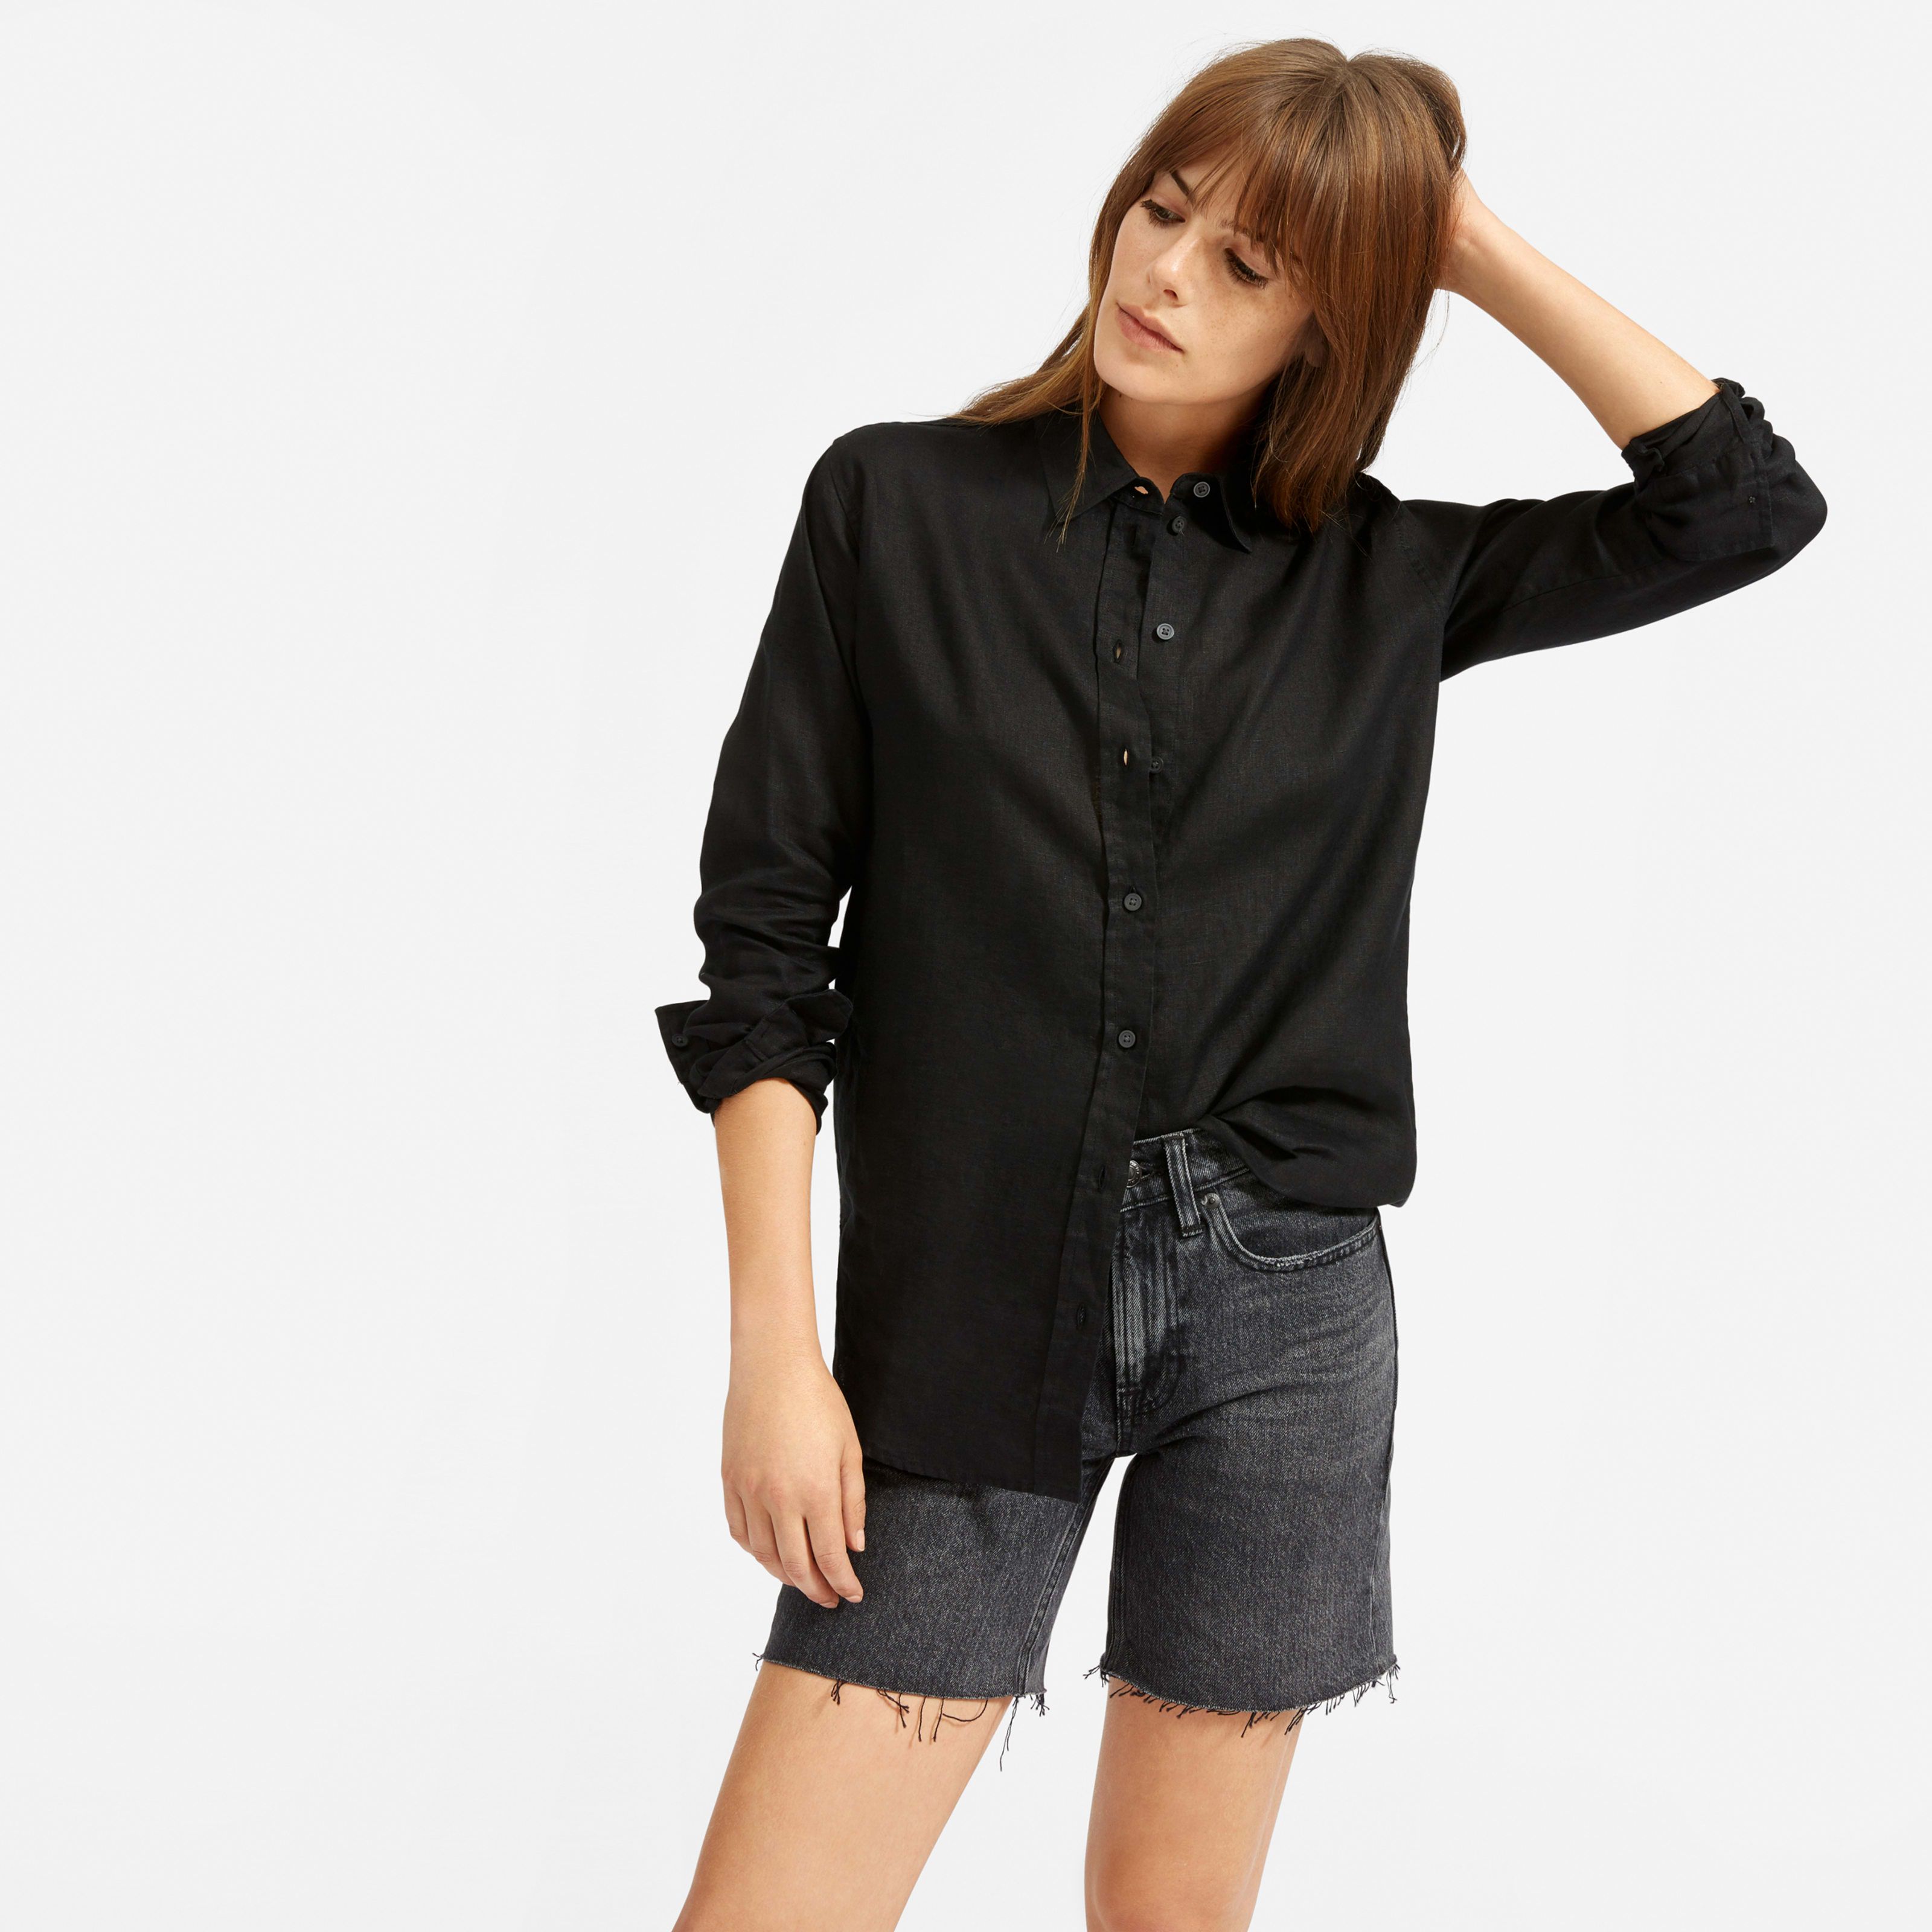 Women's Linen Relaxed Shirt by Everlane in Black, Size 14 | Everlane